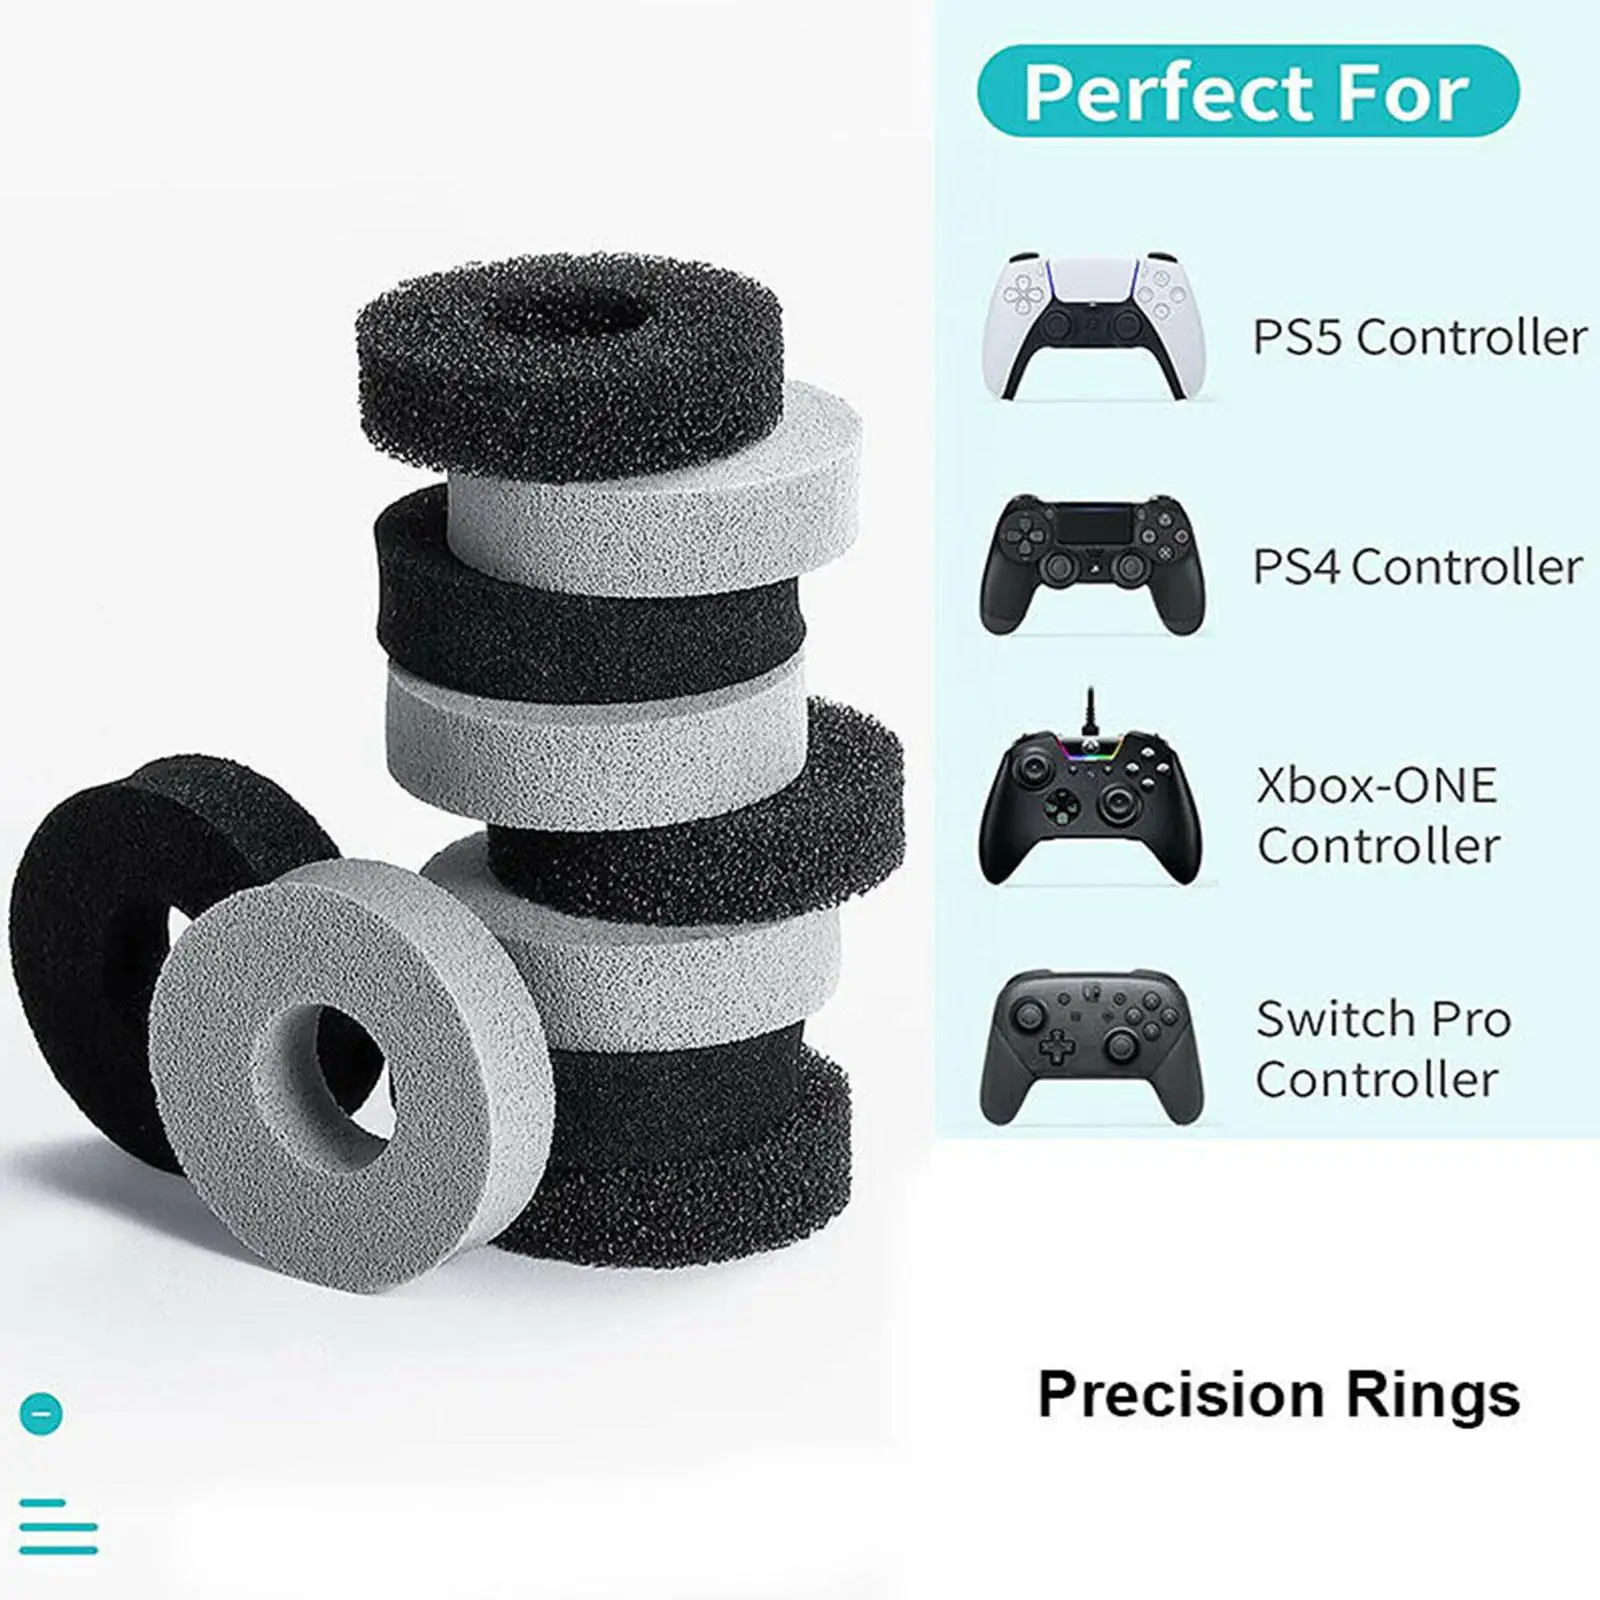 16pcs Precision Control Aiming Assisted Targeting Rings - Compatible With PS4, Enhance Motion Control Gaming Accessories